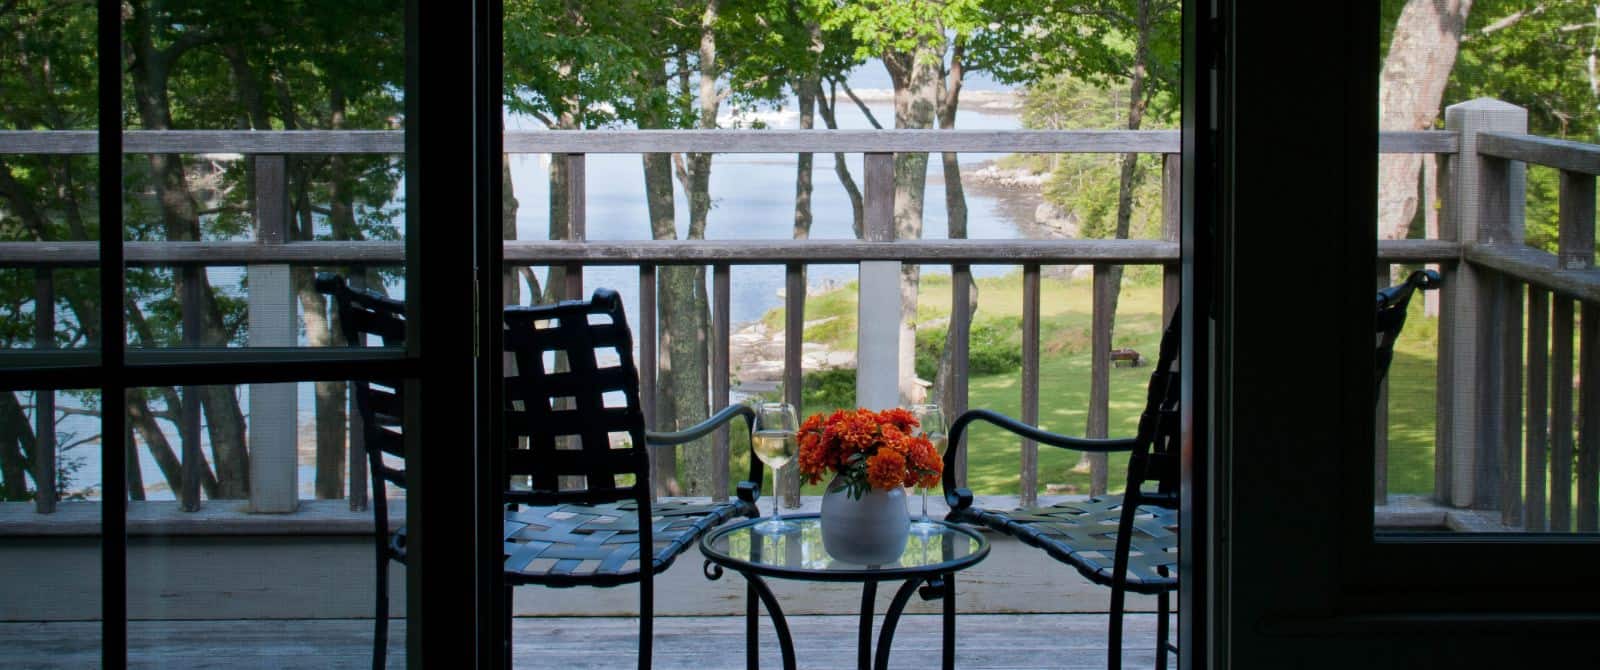 View of patio with two chairs and a small glass-top table from inside wooden framed patio doors.